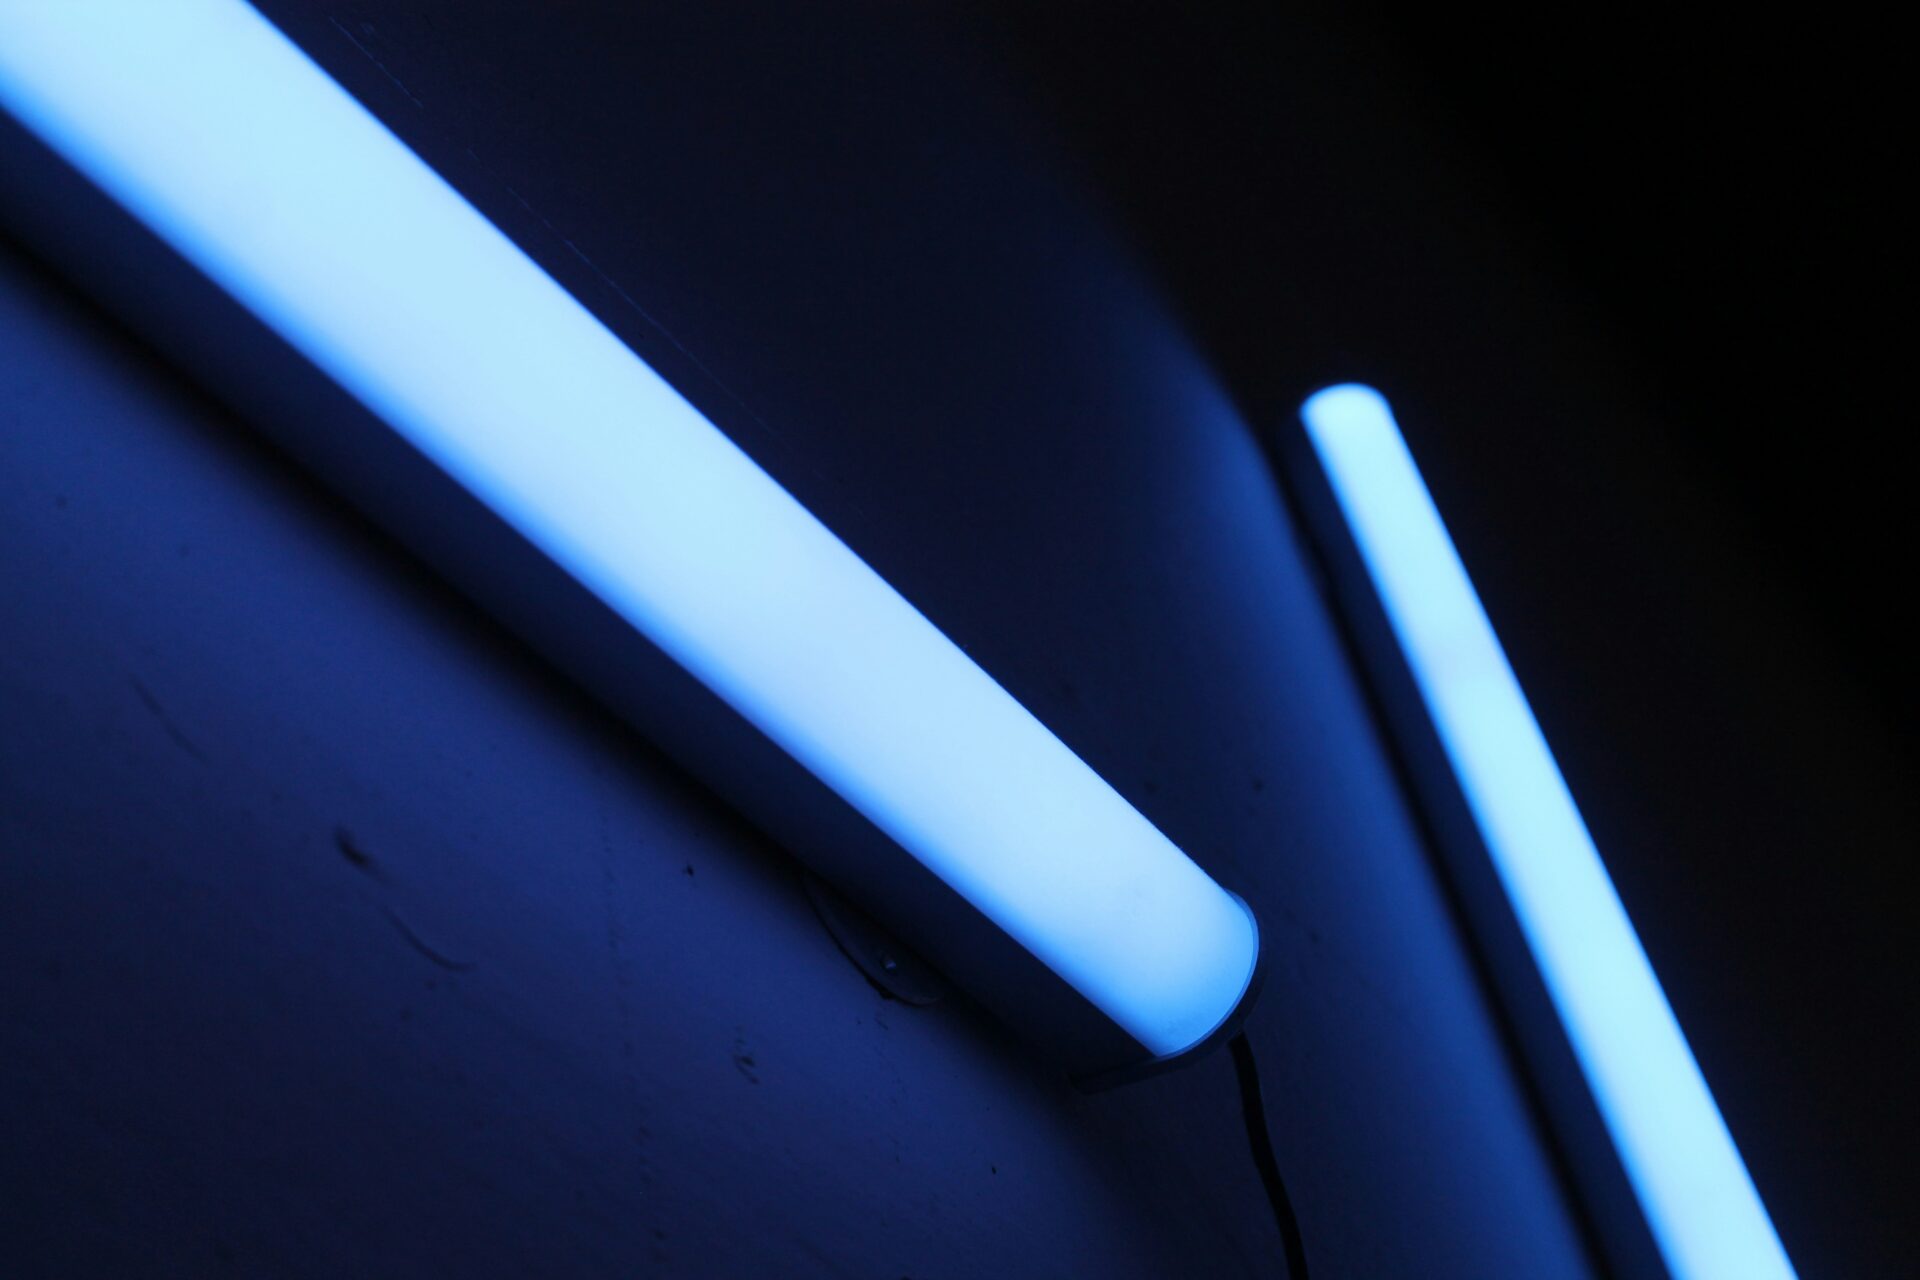 Debunking 4 Myths about UV disinfection